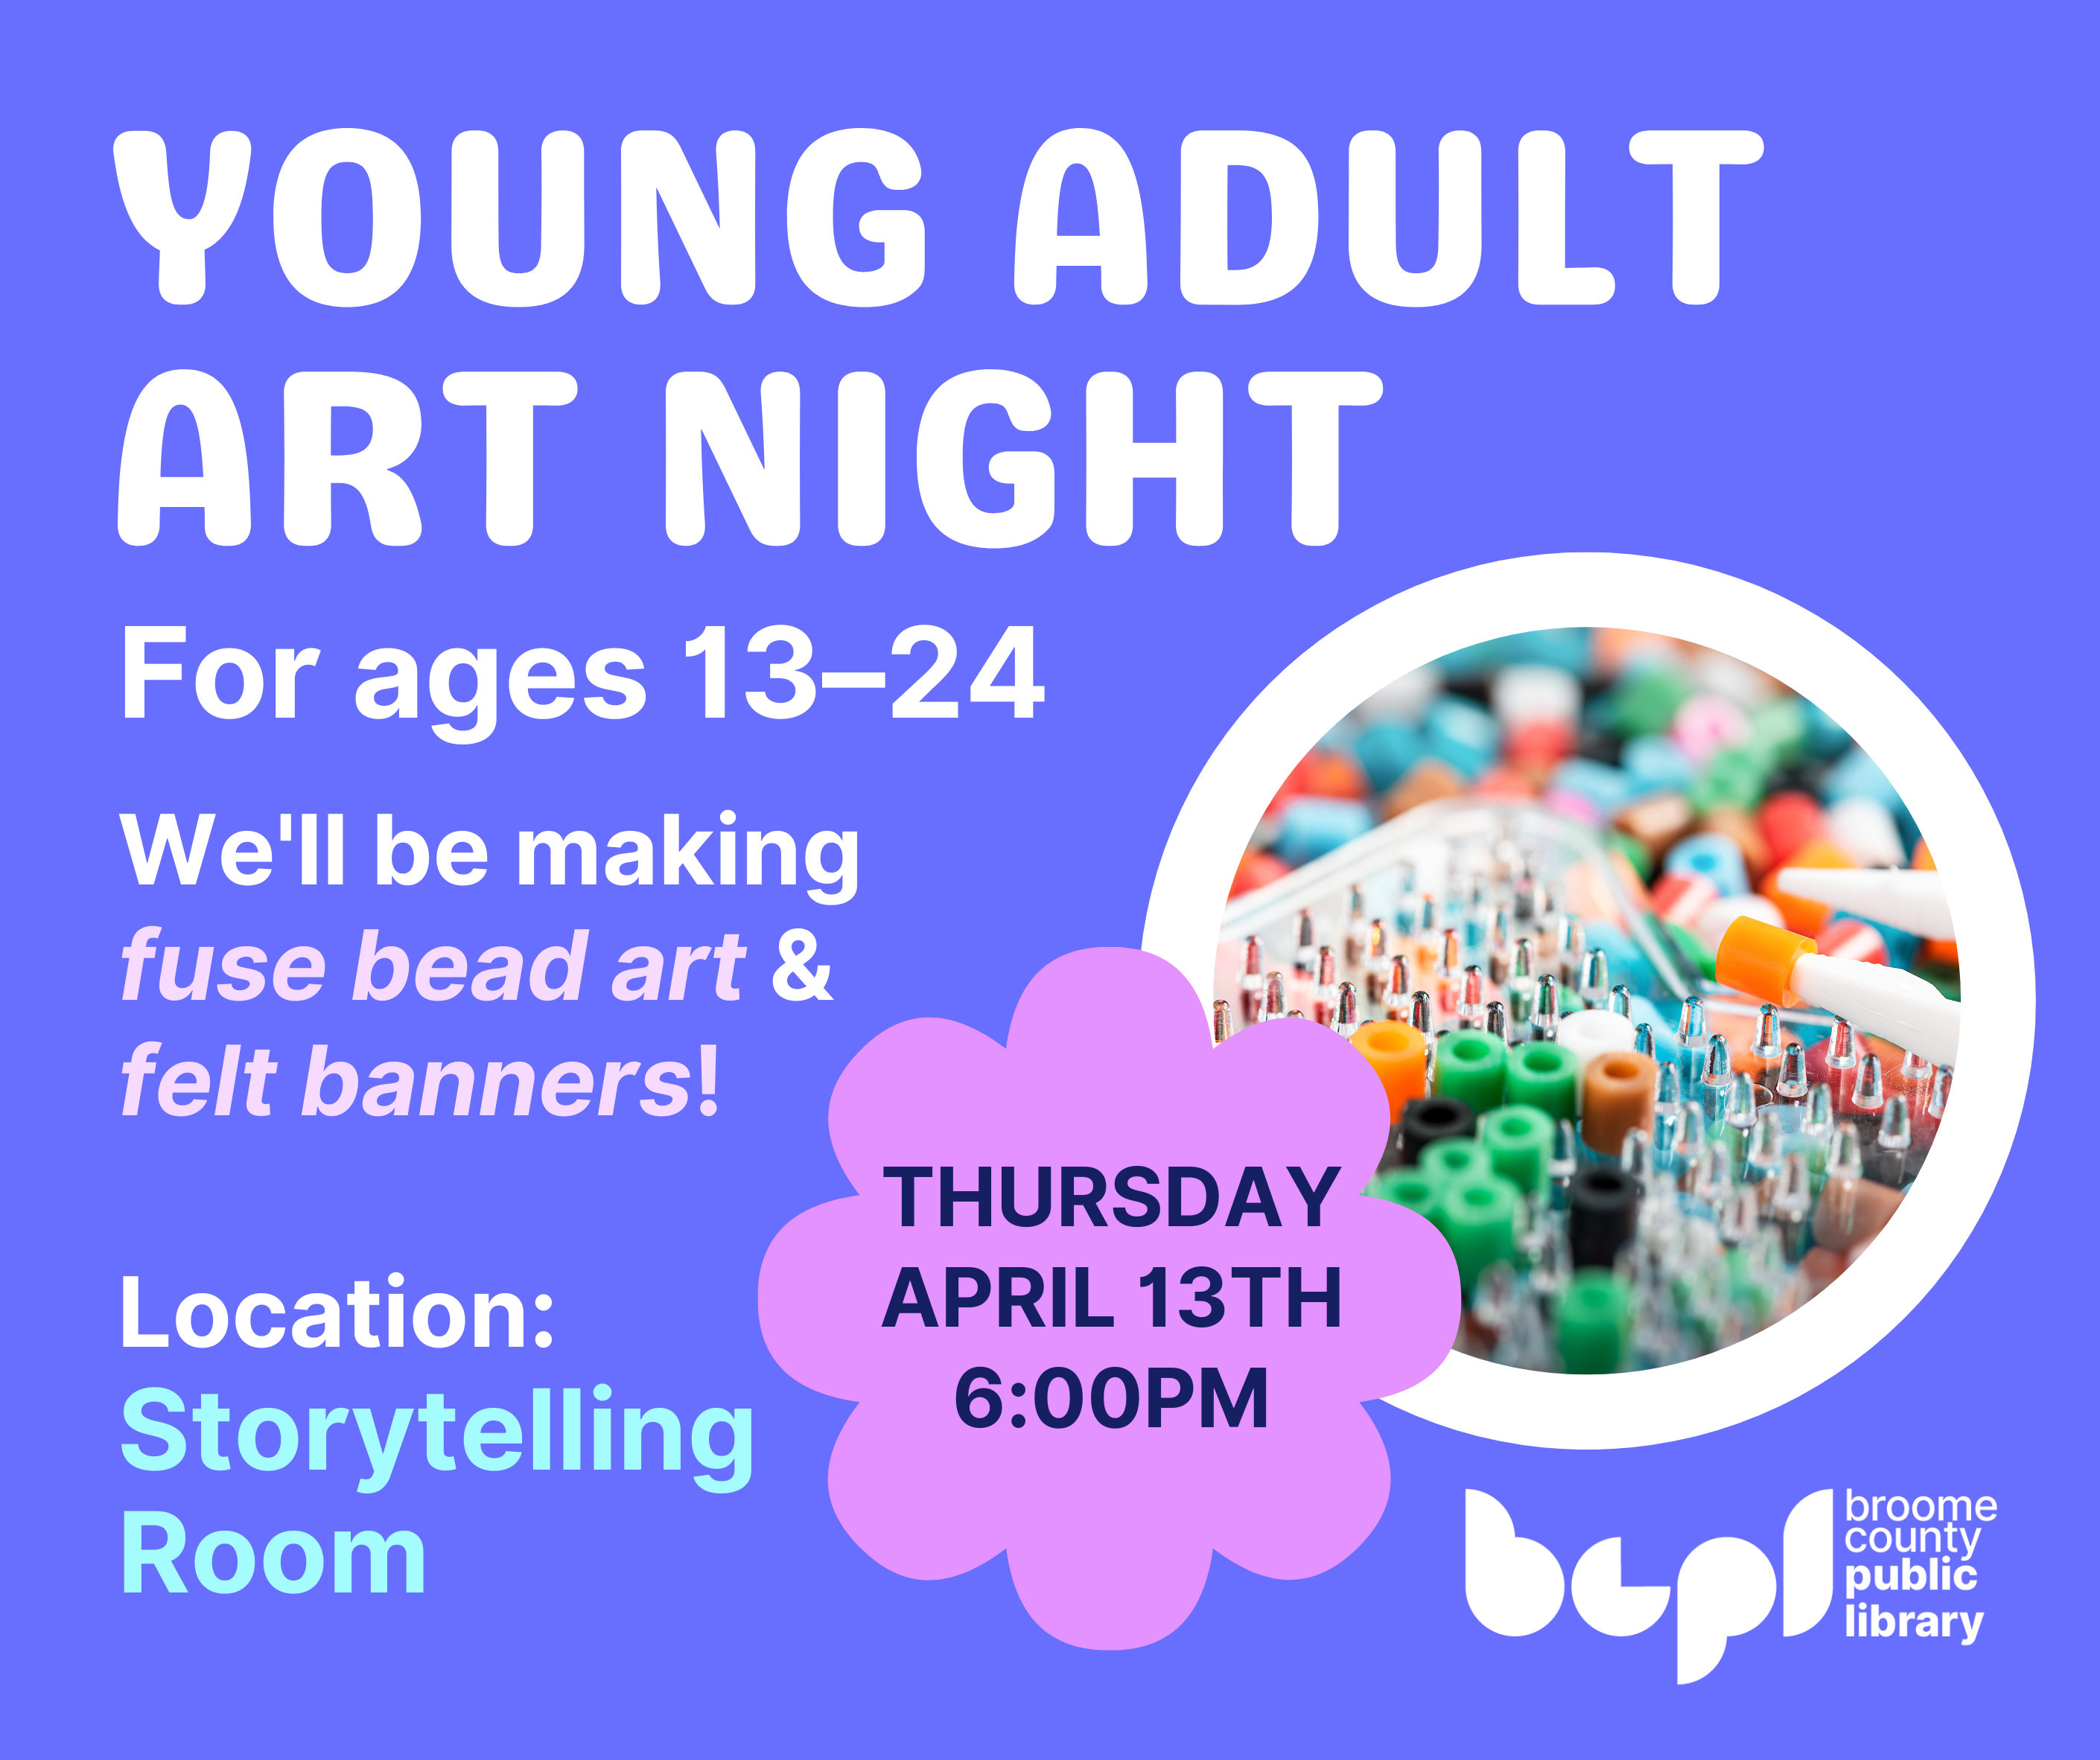 photo of young adult art night flyer